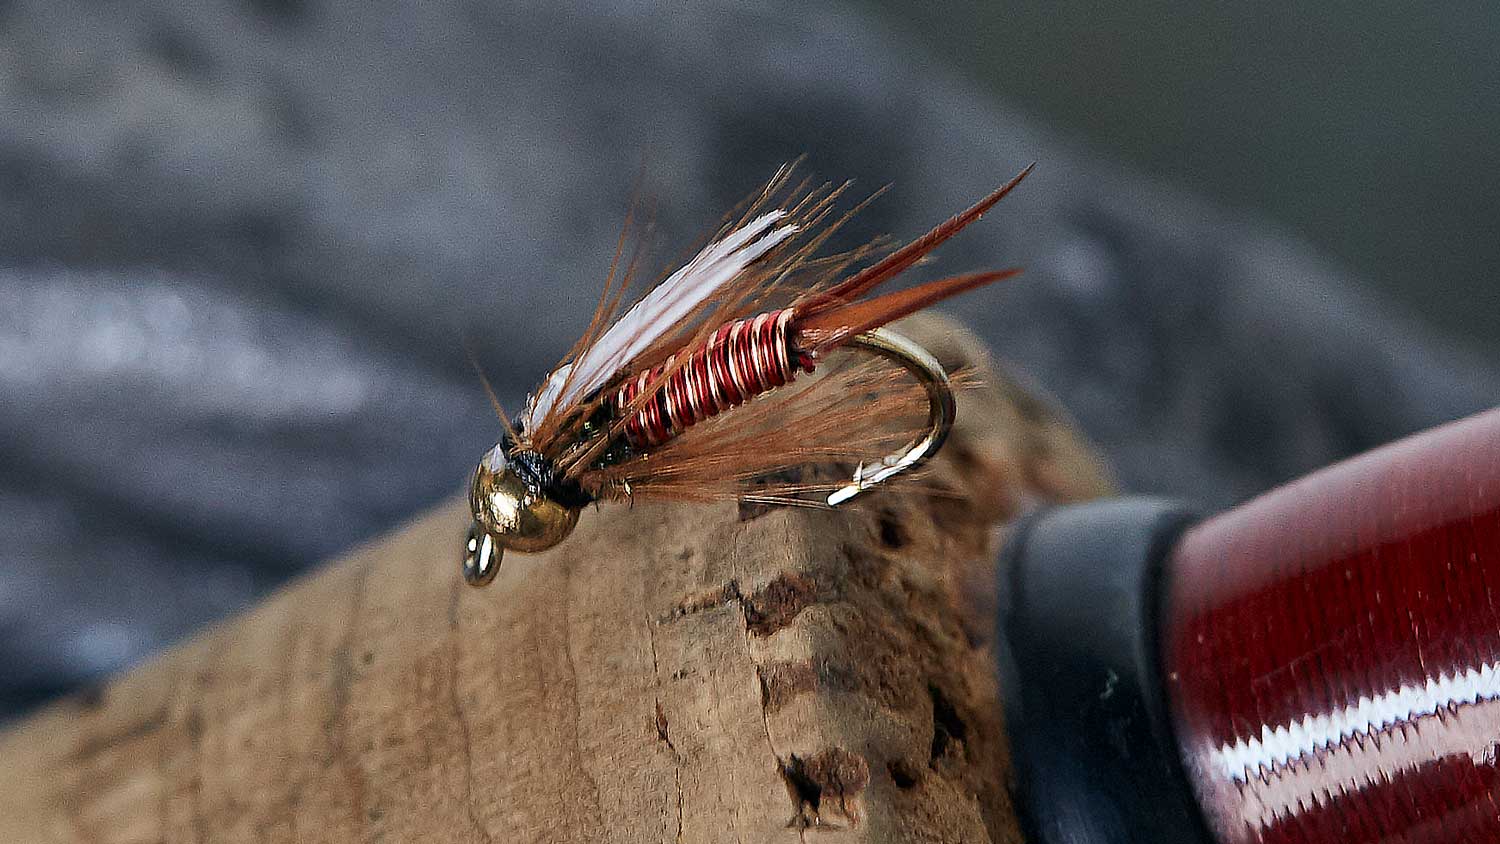 20 Top Trout Flies for October